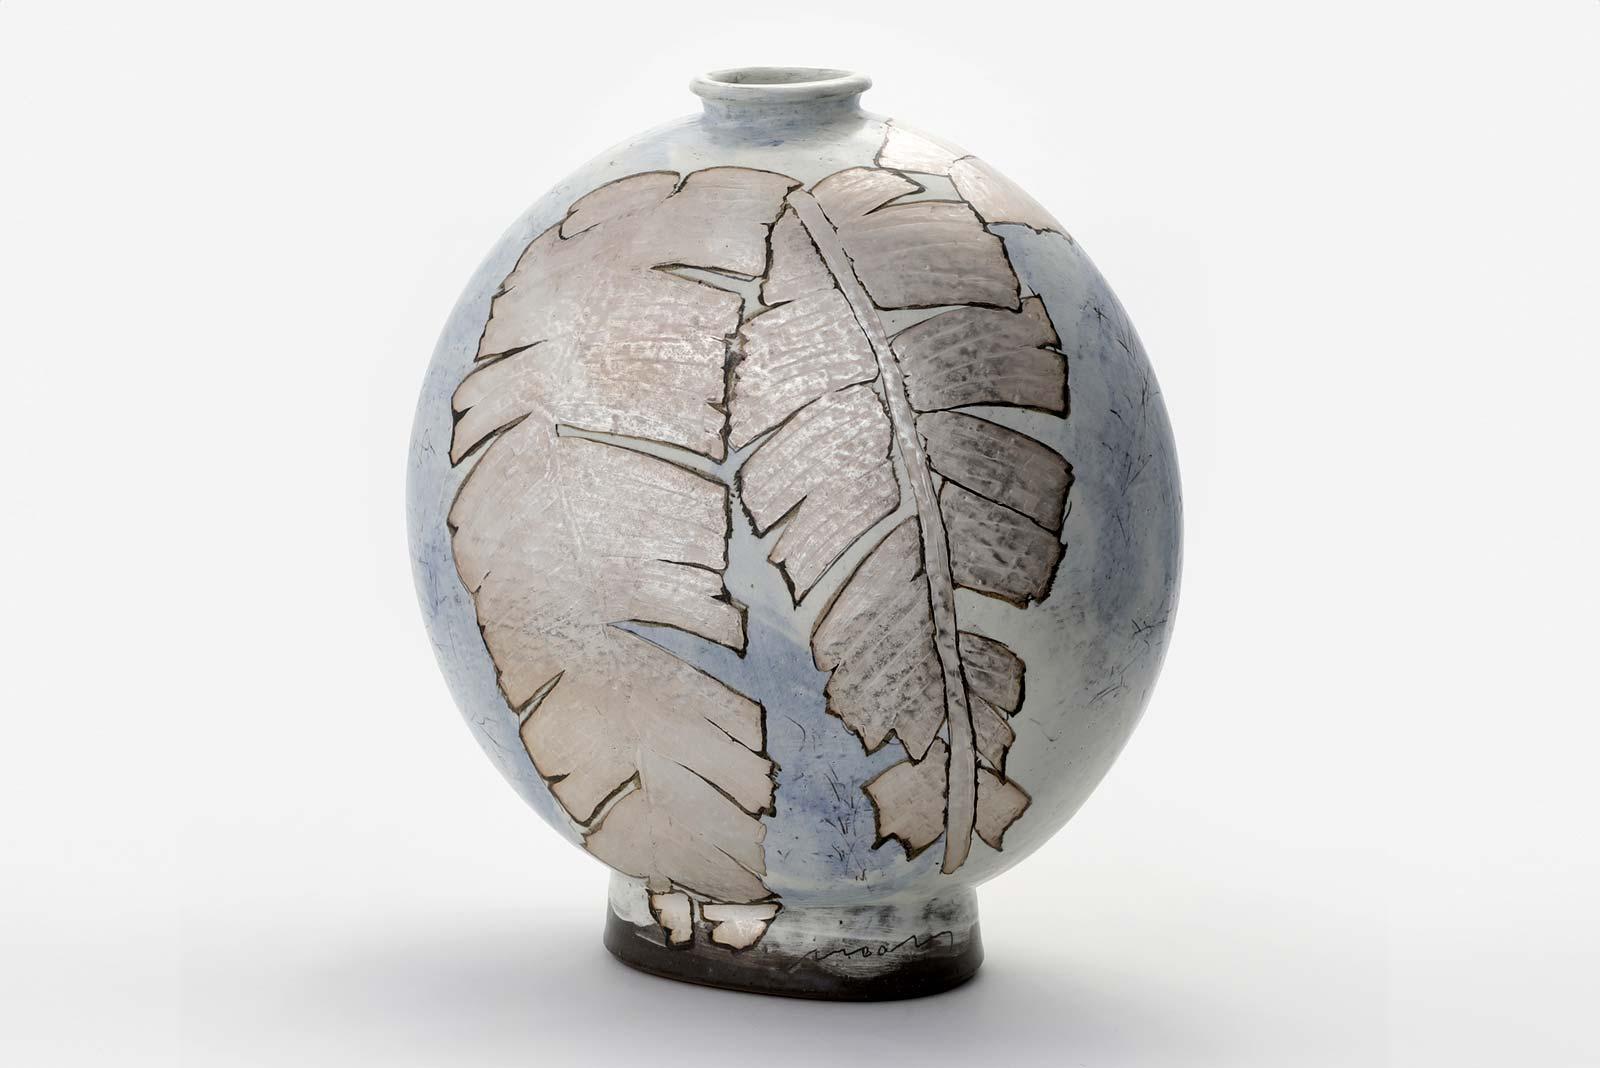 Flask-Shaped Bottle with Plantain Motif